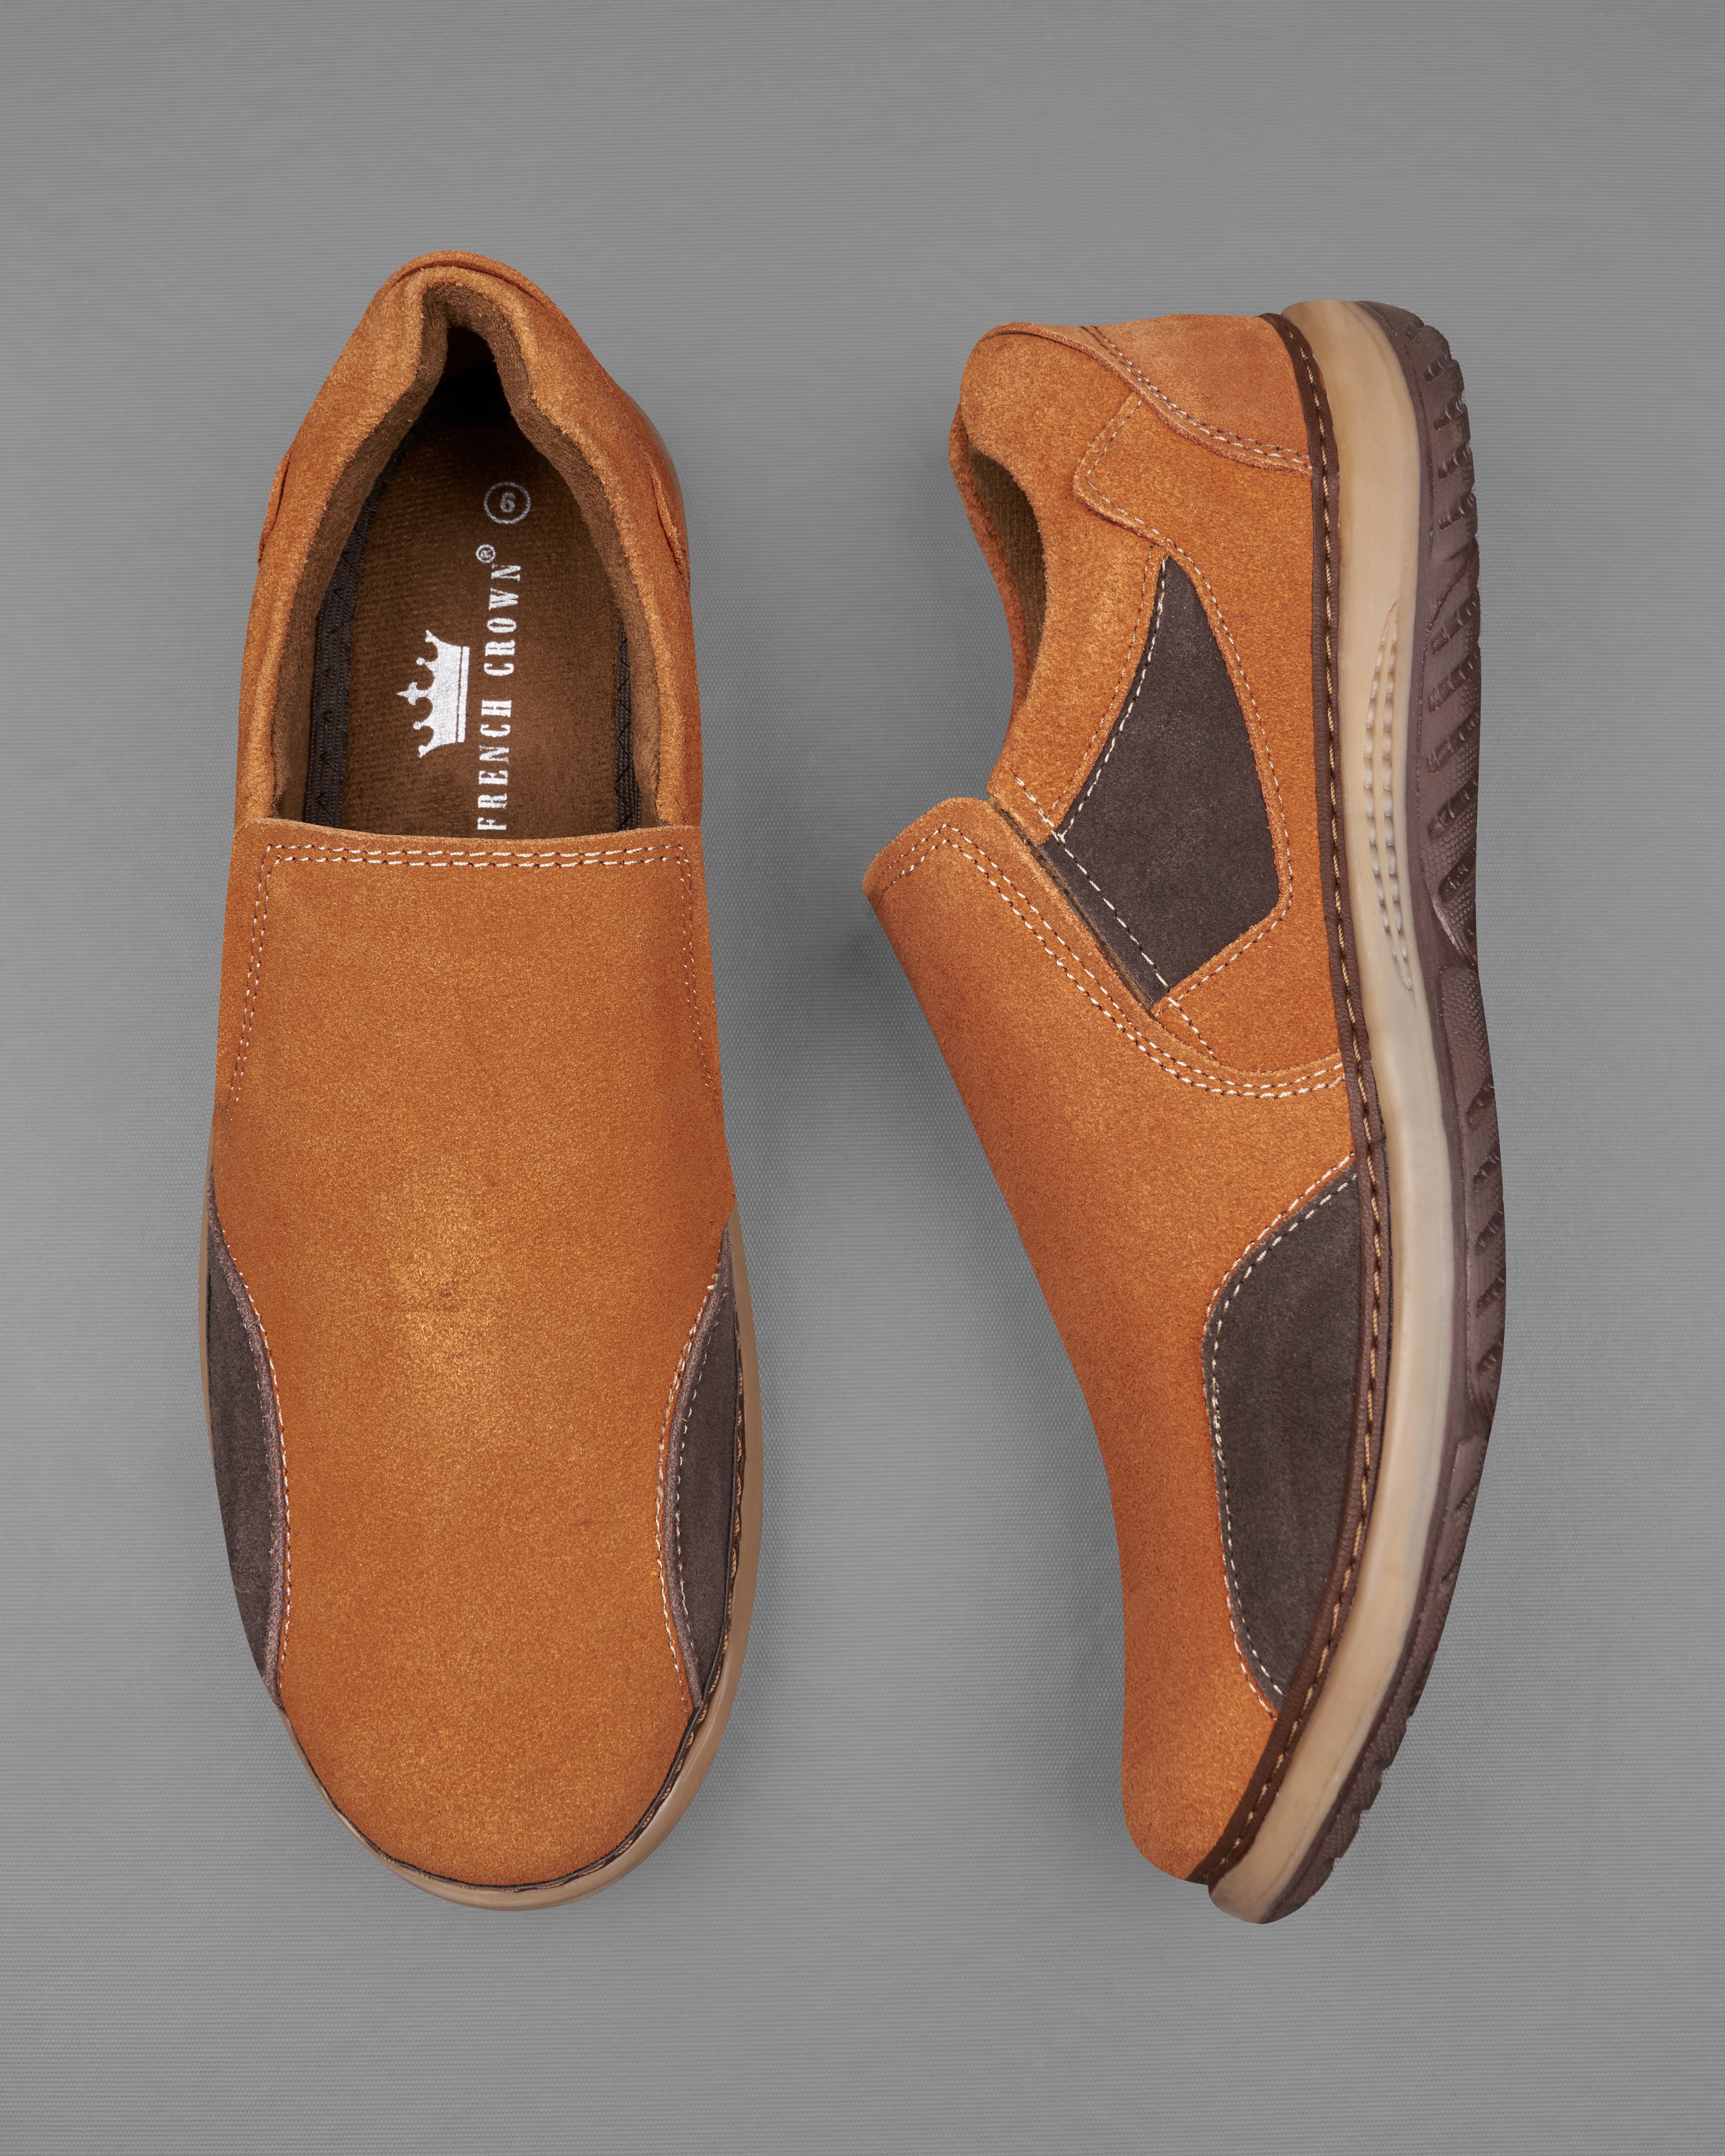 Cinnamon Brown Slip On Suede leather Shoes FT079-6, FT079-7, FT079-8, FT079-9, FT079-10, FT079-11